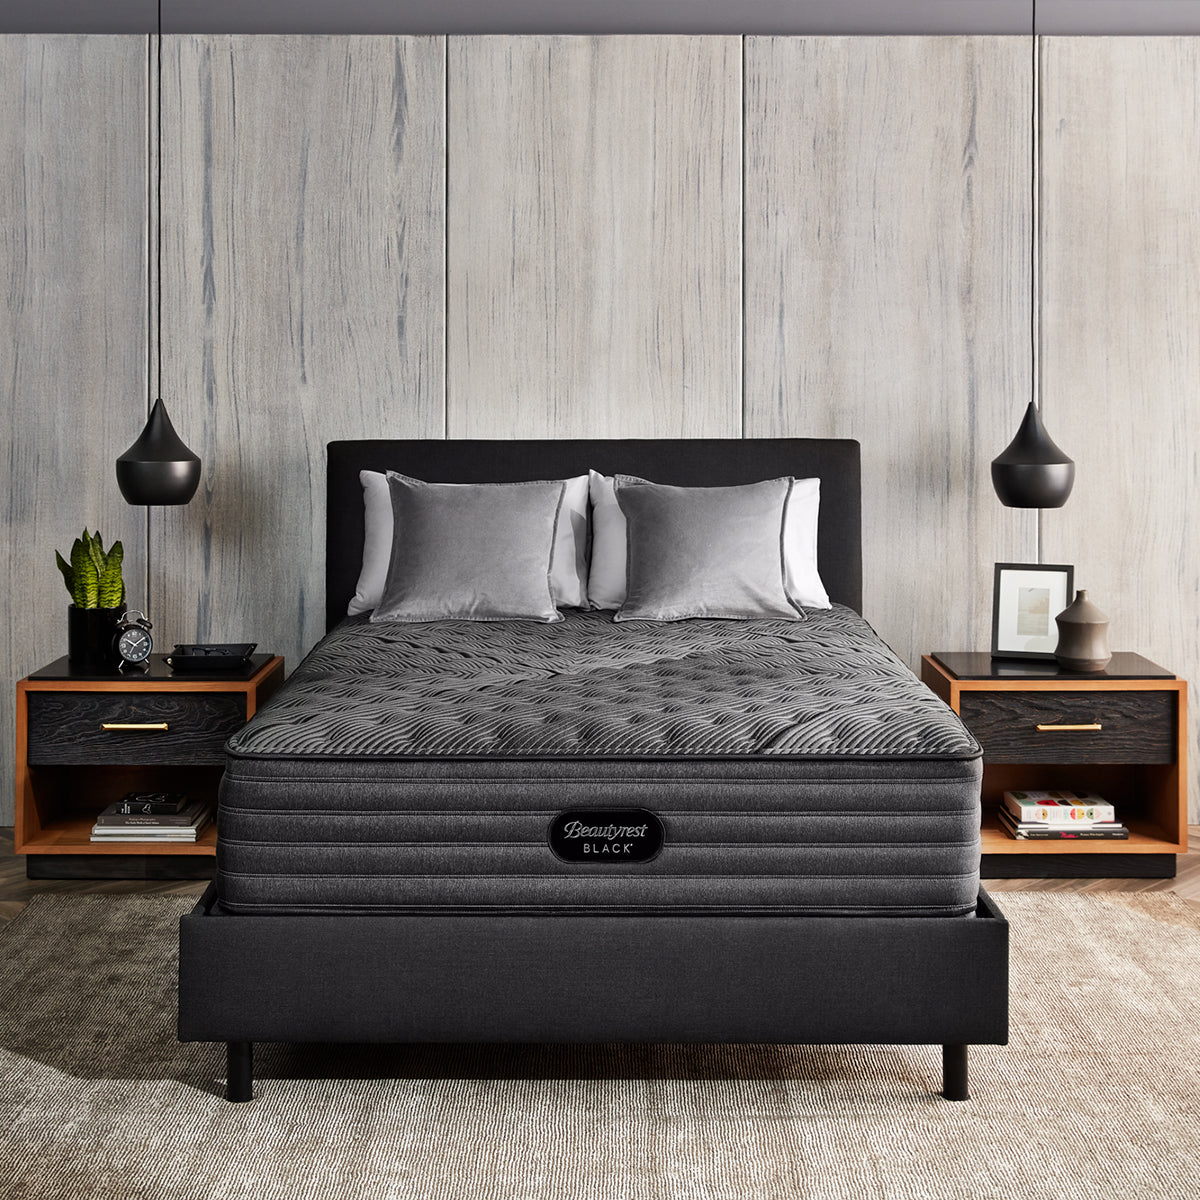 Beautyrest Black K-Class Firm Pillow Top Mattress On Bed Frame With Pillows In Bedroom Front View